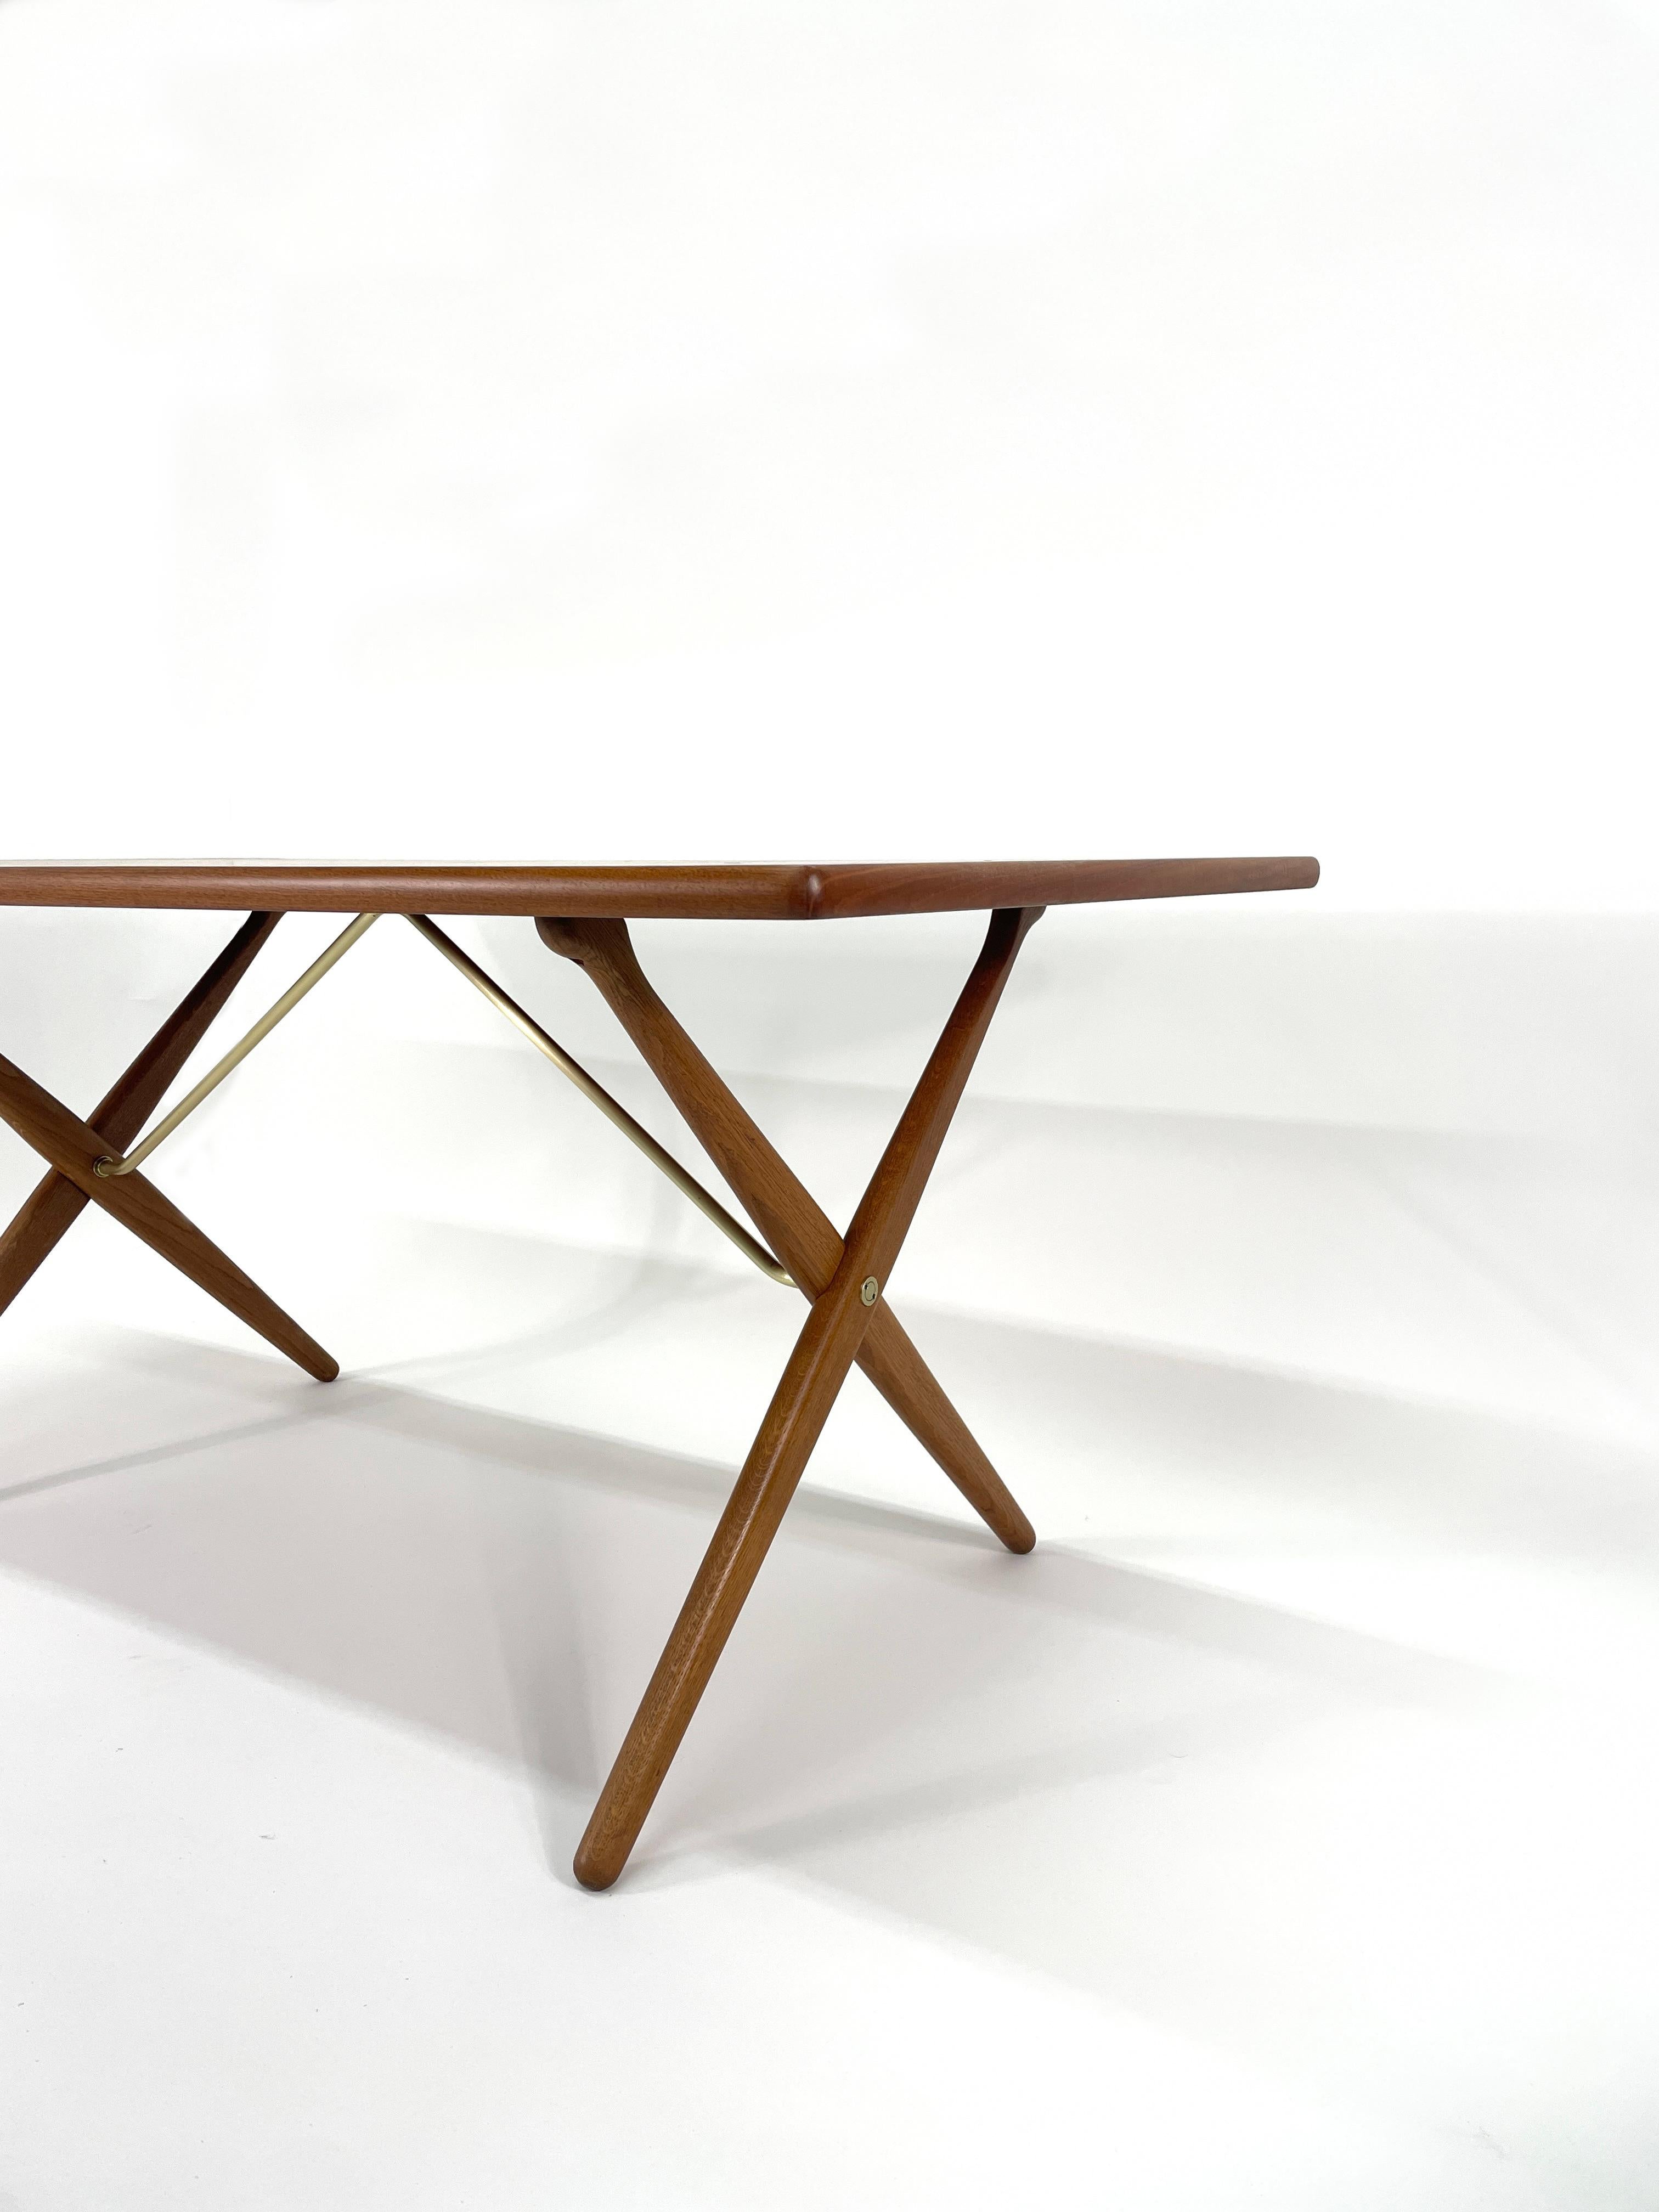 Hans J. Wegner AT-303 “Sabre” Dining Table for Andreas Tuck In Excellent Condition For Sale In San Diego, CA